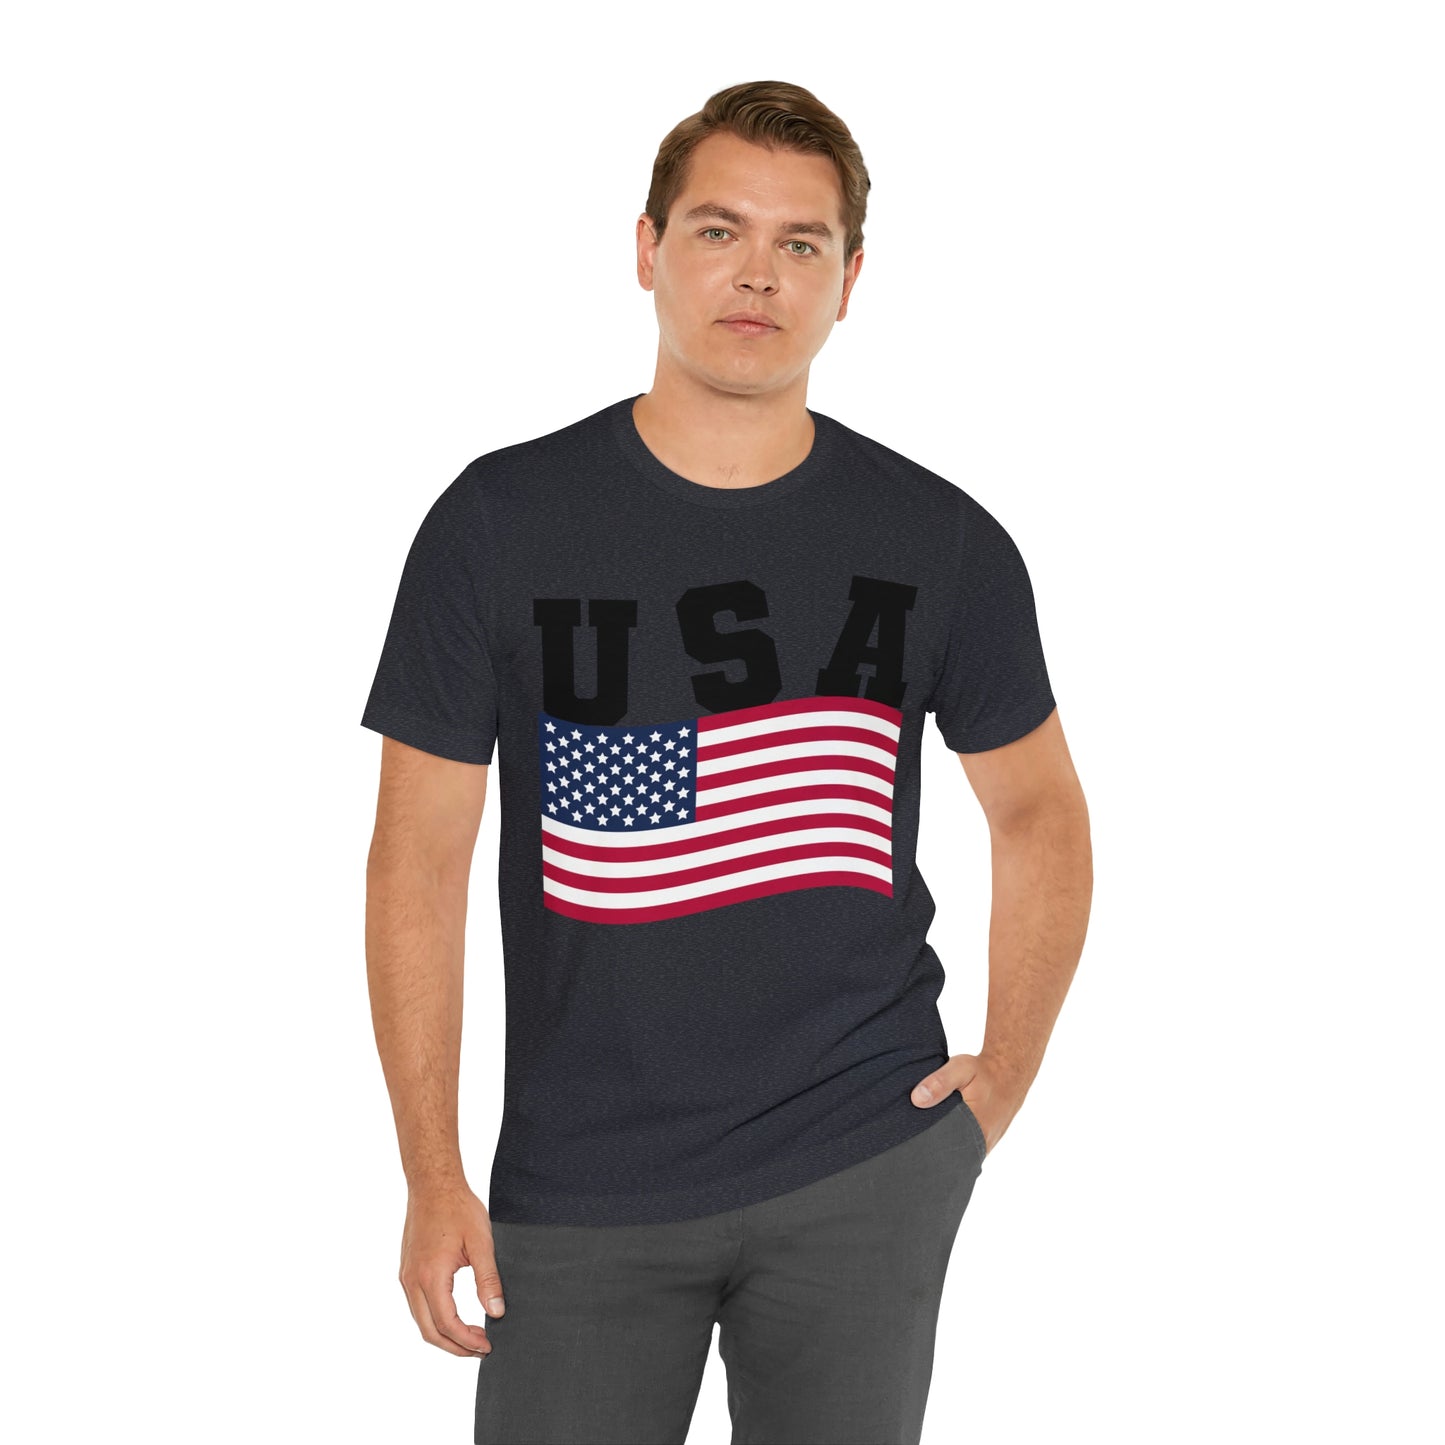 American flag shirt, Red, white, and blue shirt, 4th of July shirt